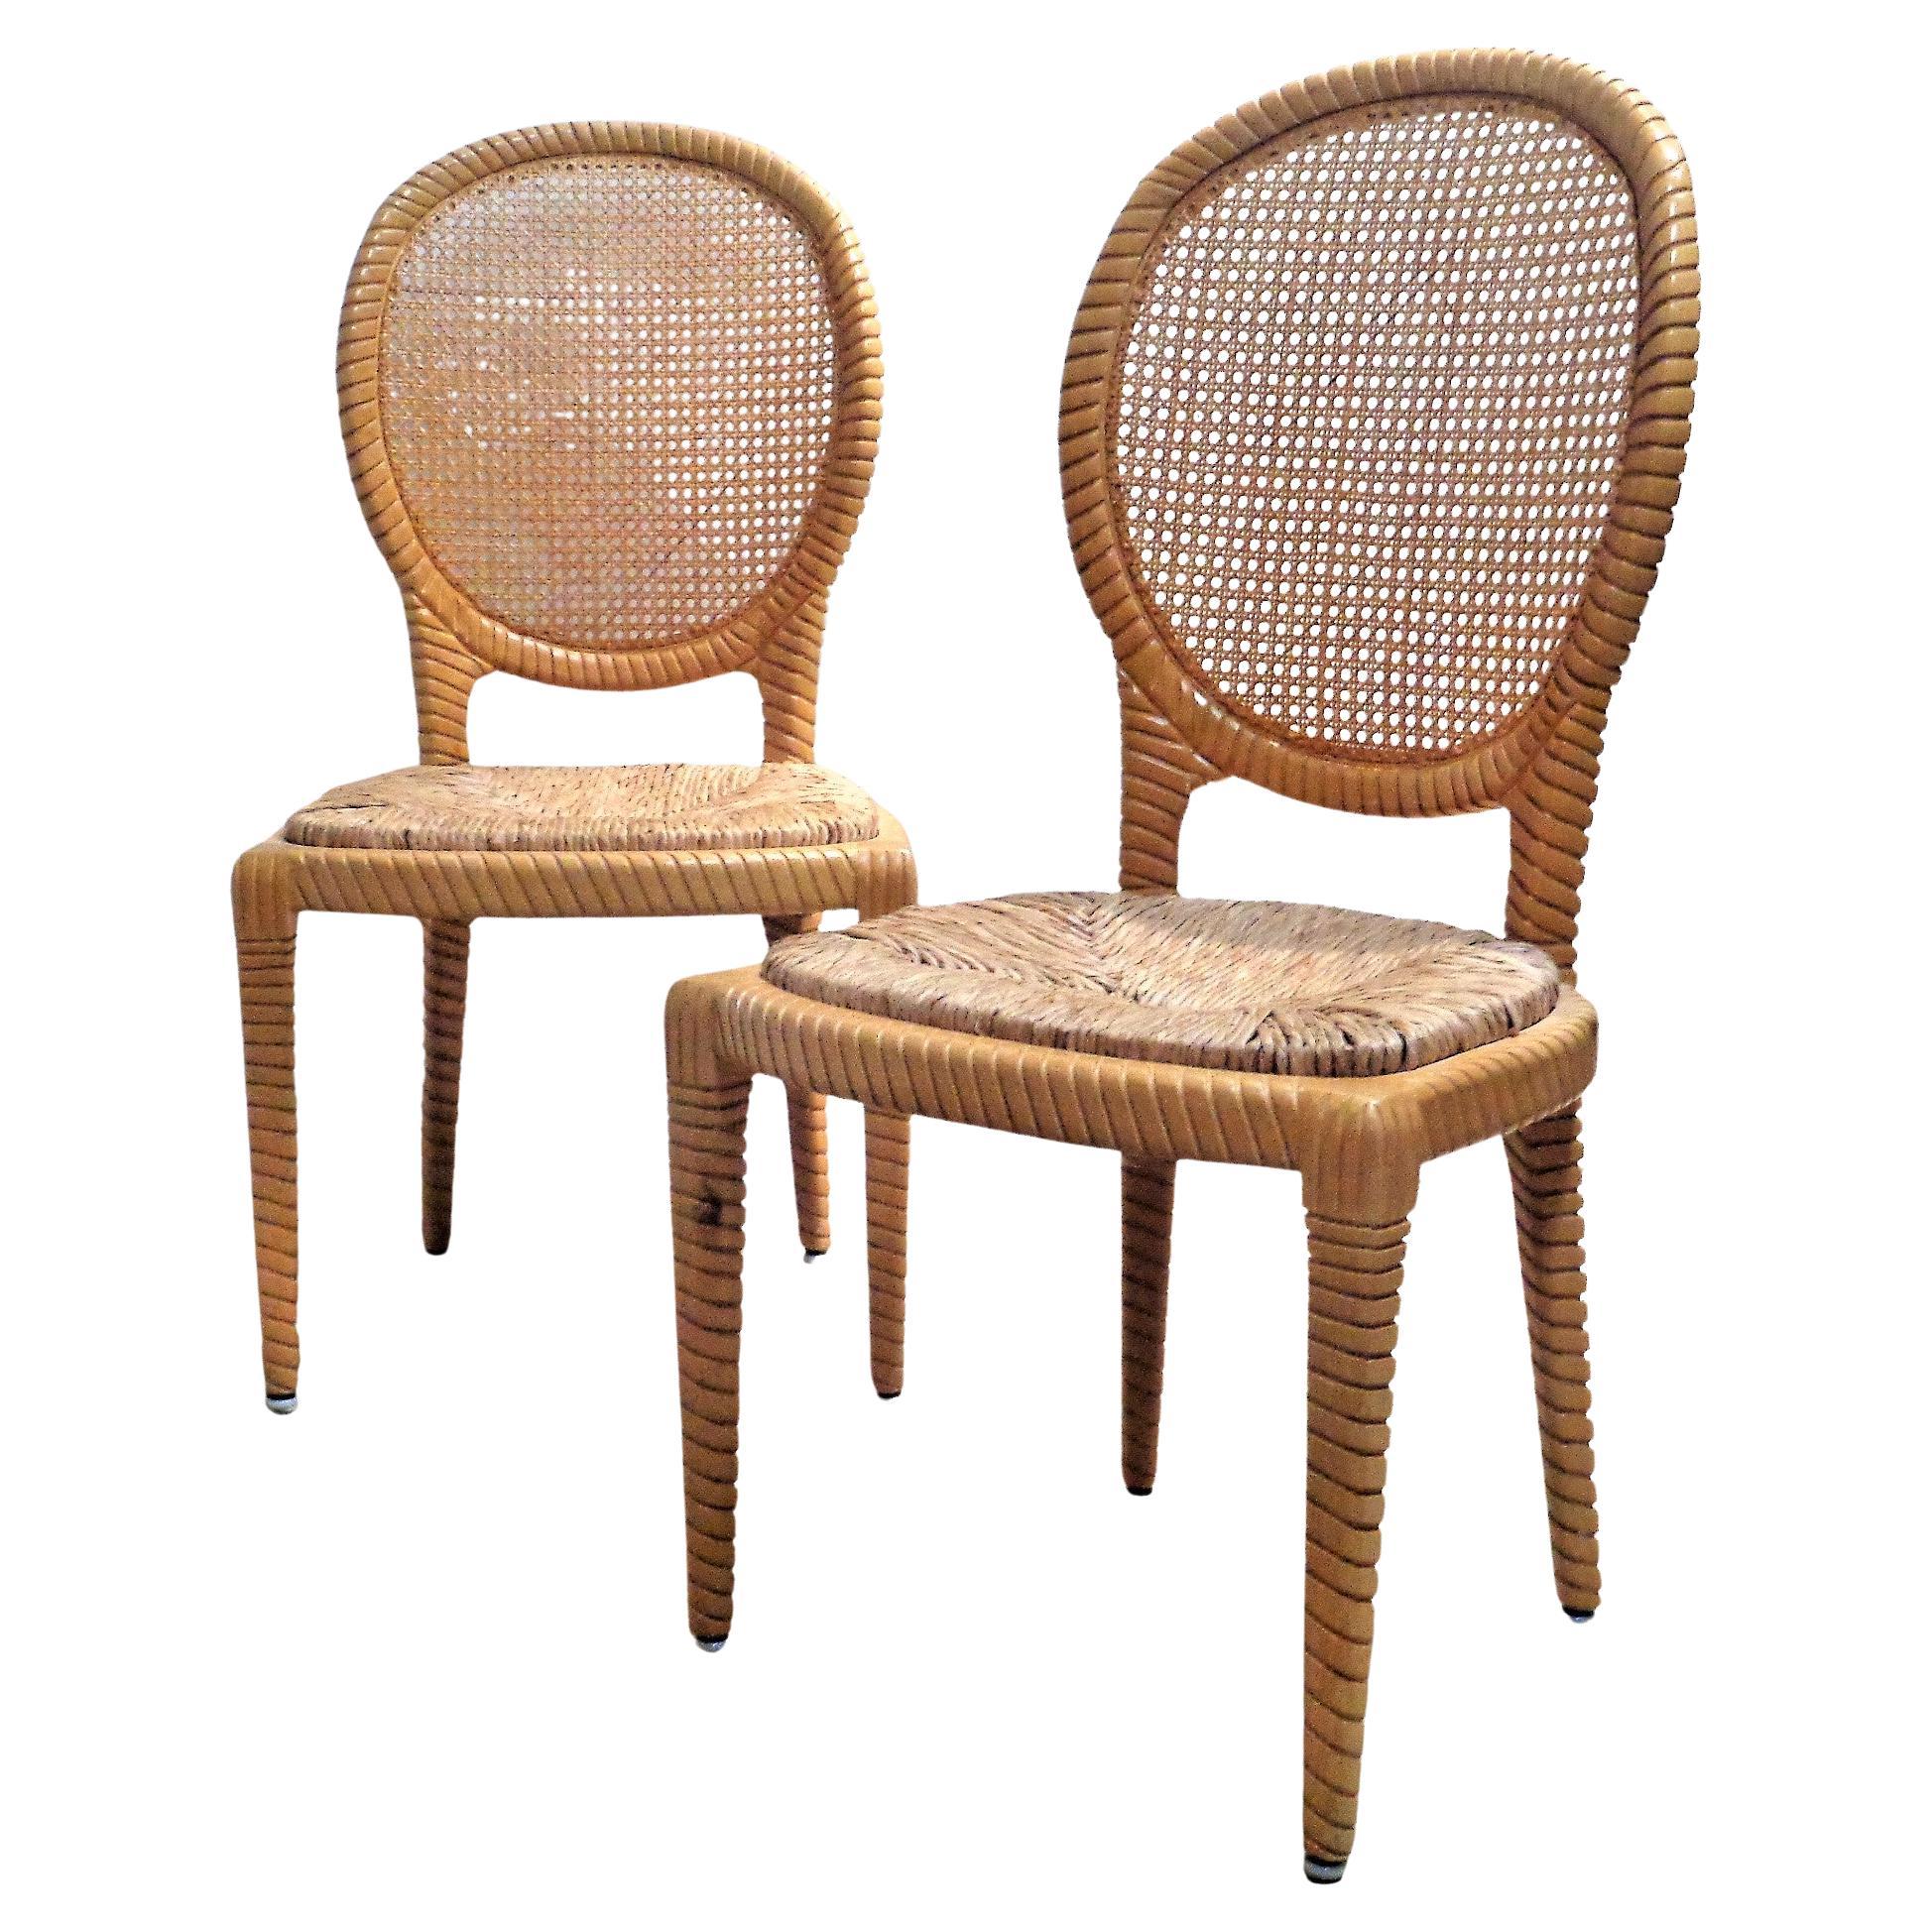 Pair of Faux Rope Carved Wood Chairs